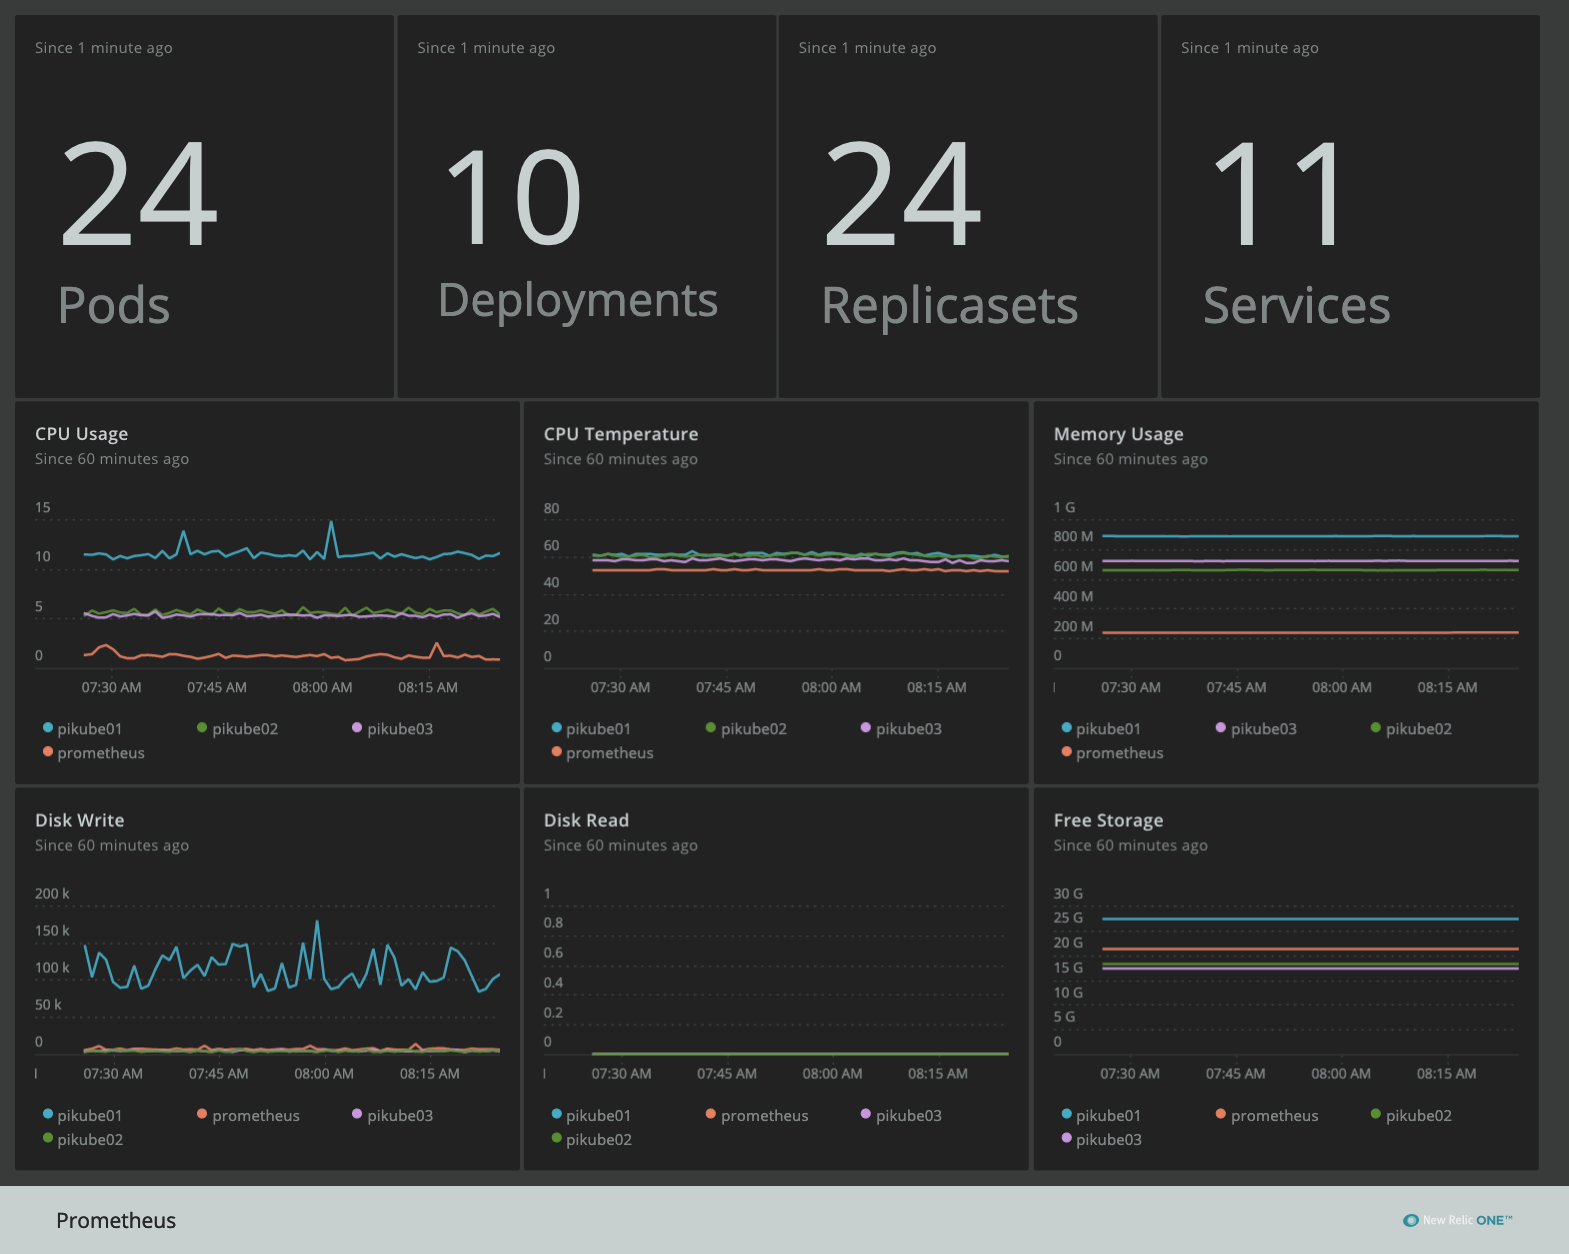 screencapture-one-newrelic-launcher-dashboards-launcher-2020-10-09-17_26_51.png